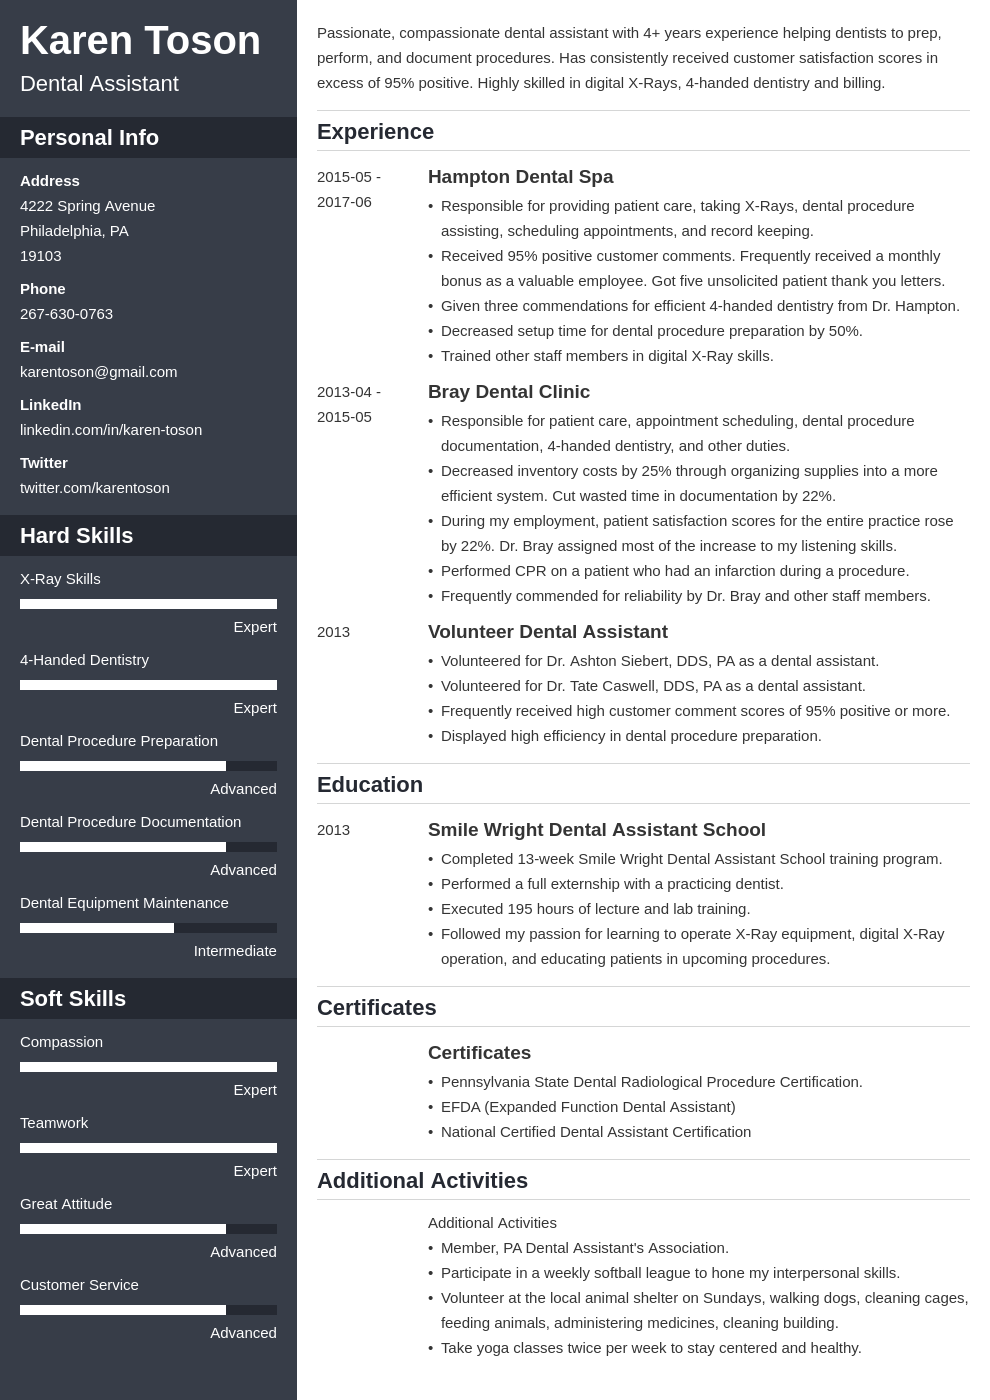 one page cv maker